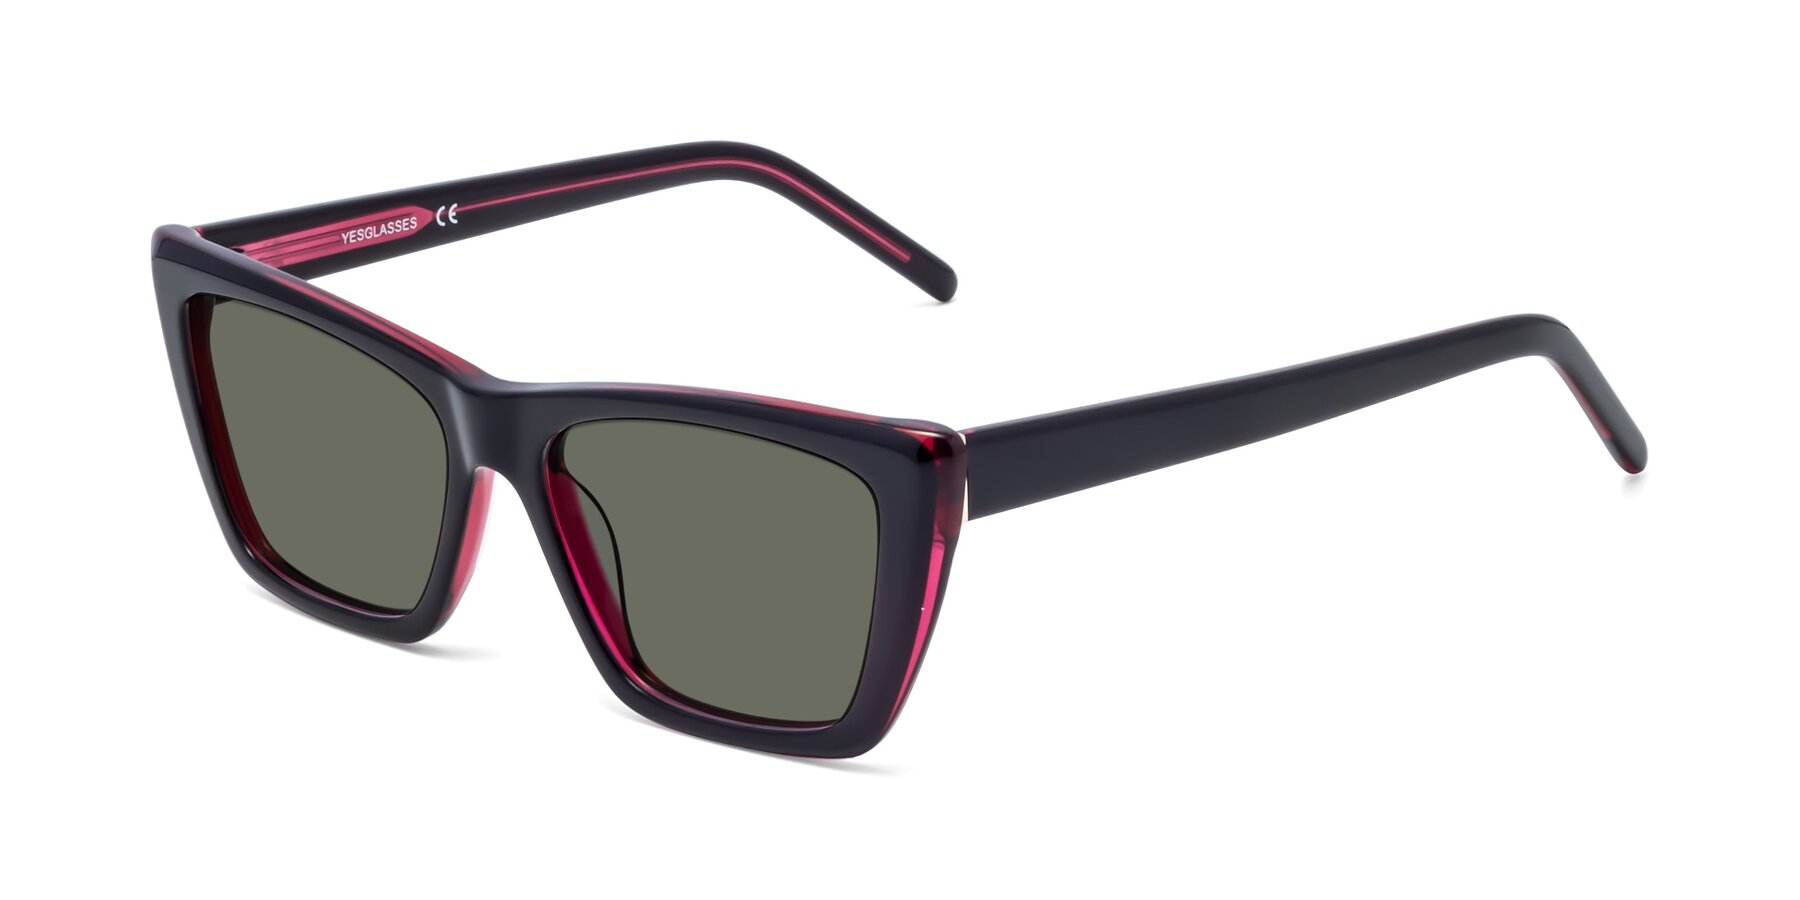 Angle of 1494 in Black-Wine with Gray Polarized Lenses